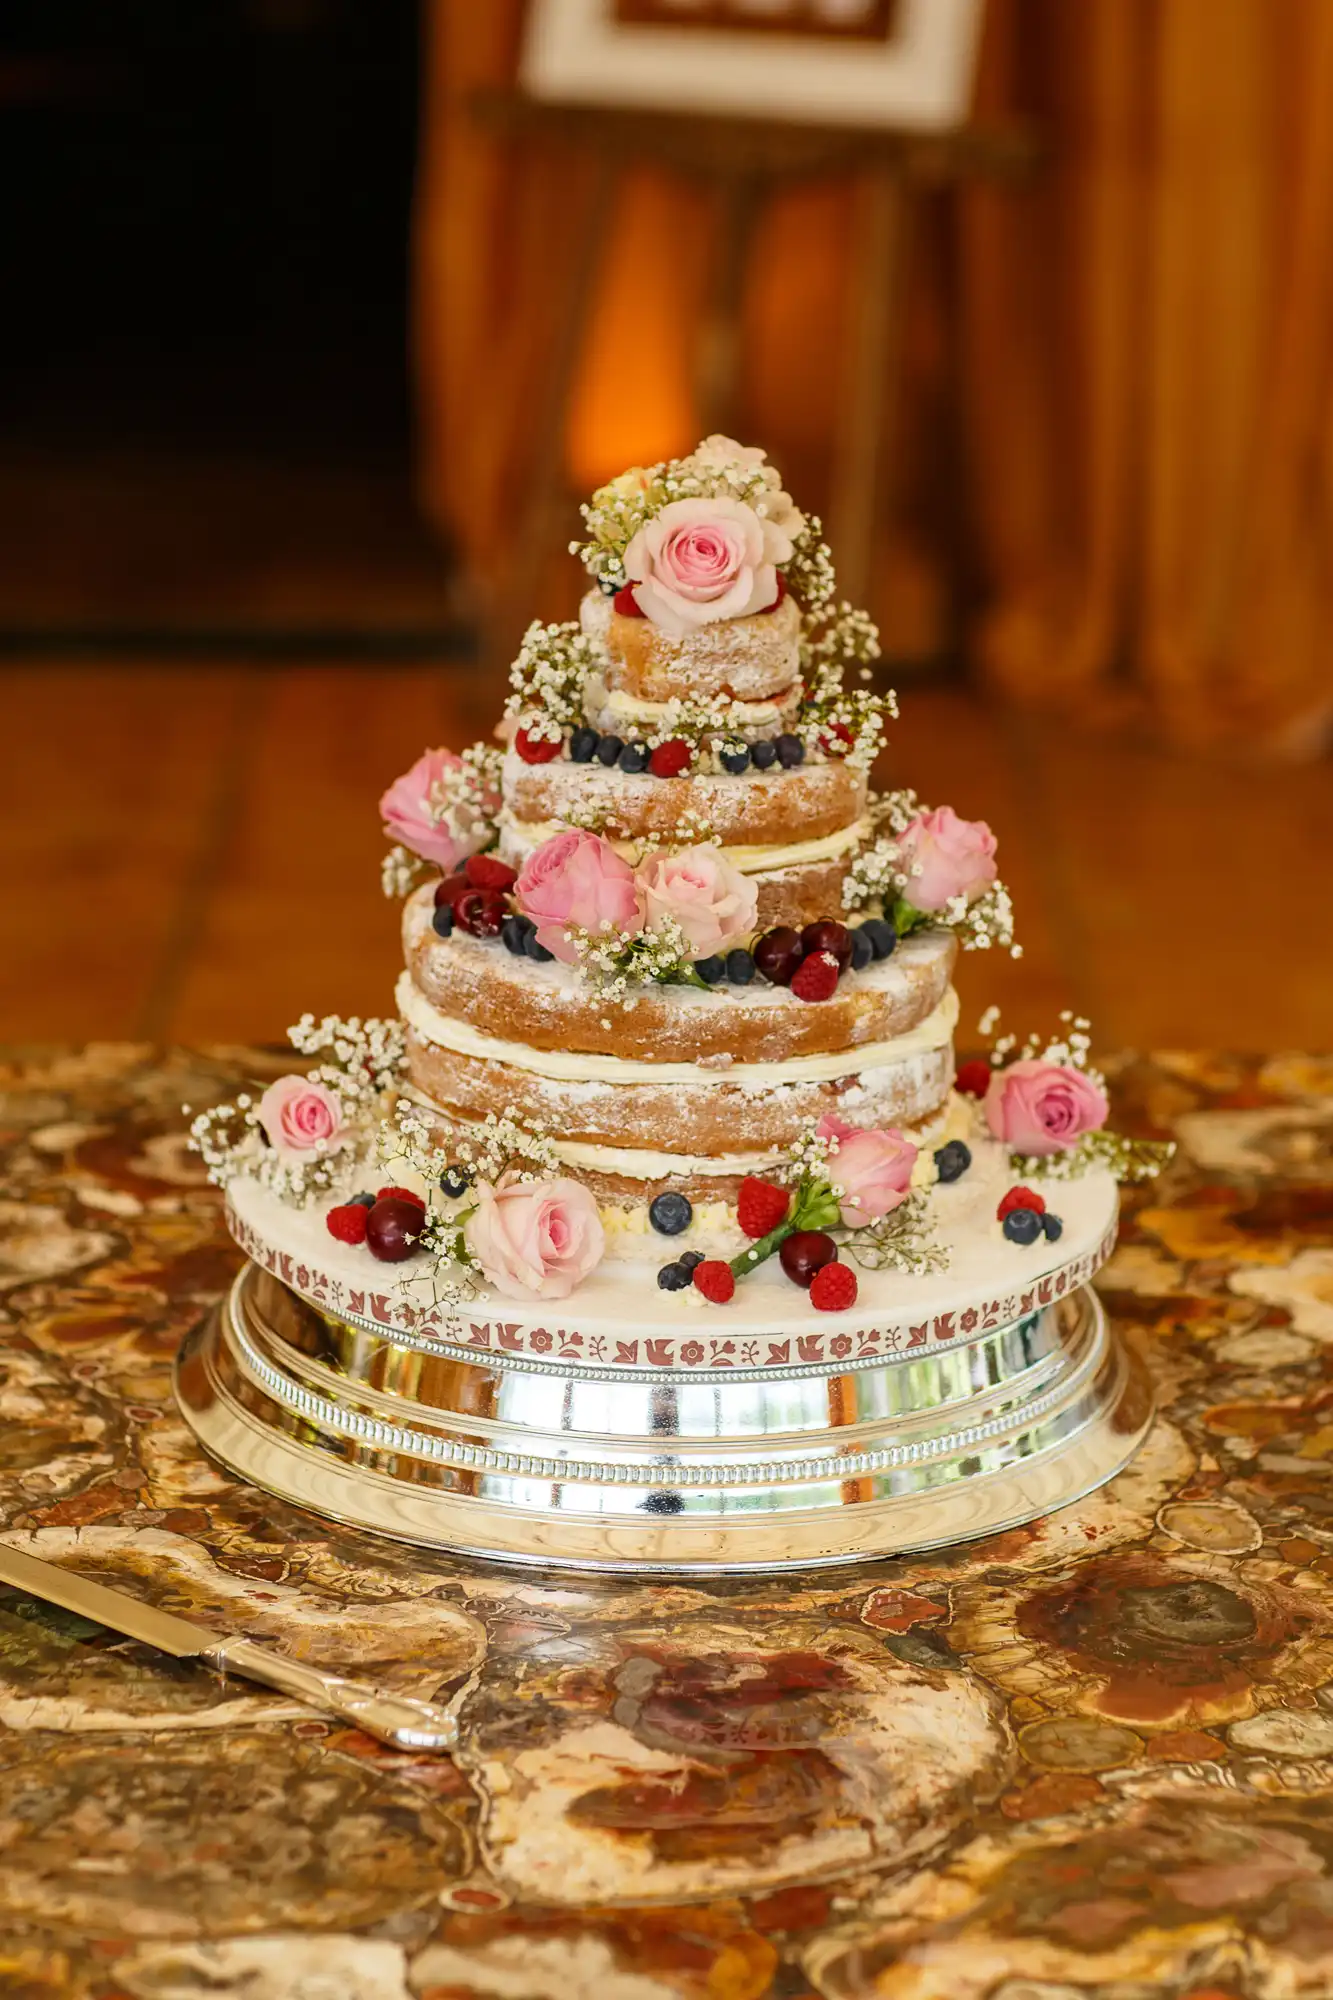 A multi-tiered naked wedding cake adorned with fresh berries, pink roses, and small white flowers, displayed on a decorative silver stand.